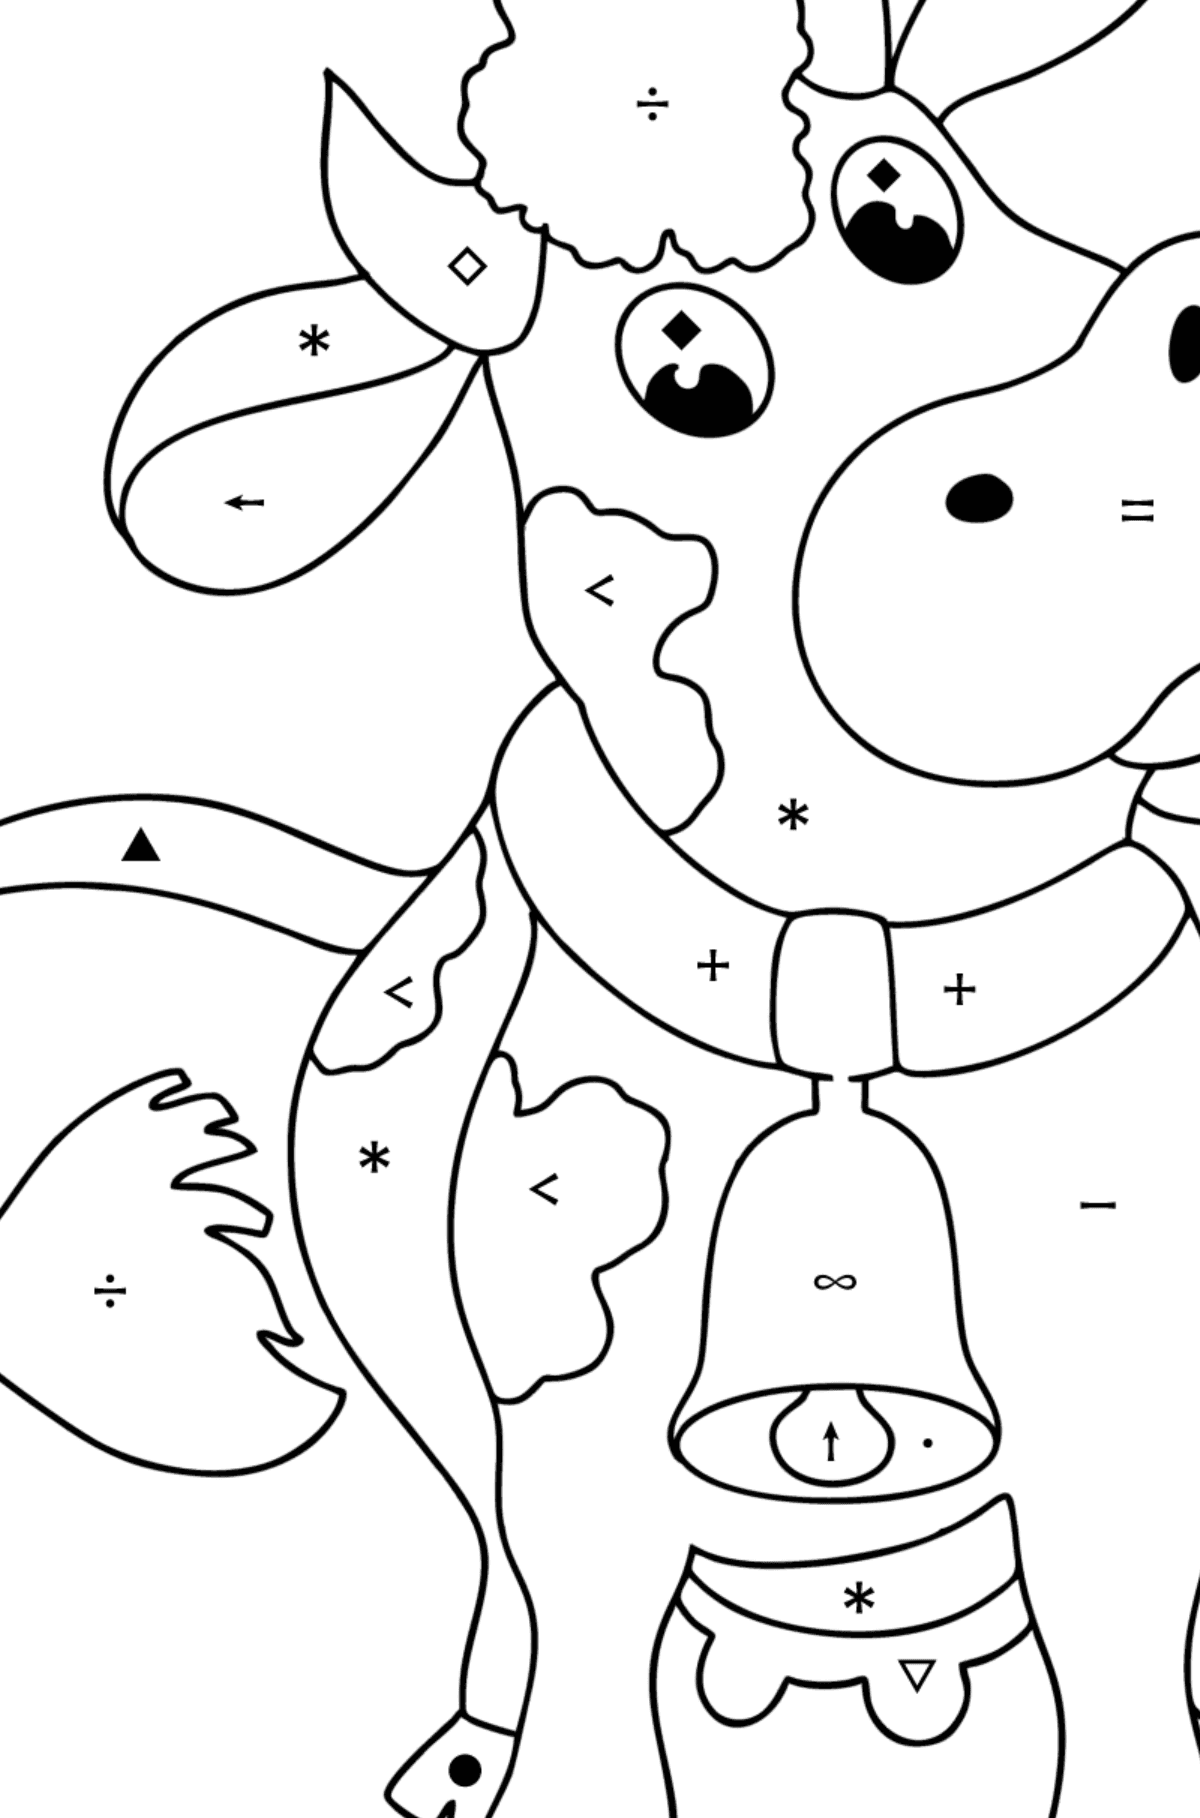 Coloring page cow with a bell - Coloring by Symbols for Kids